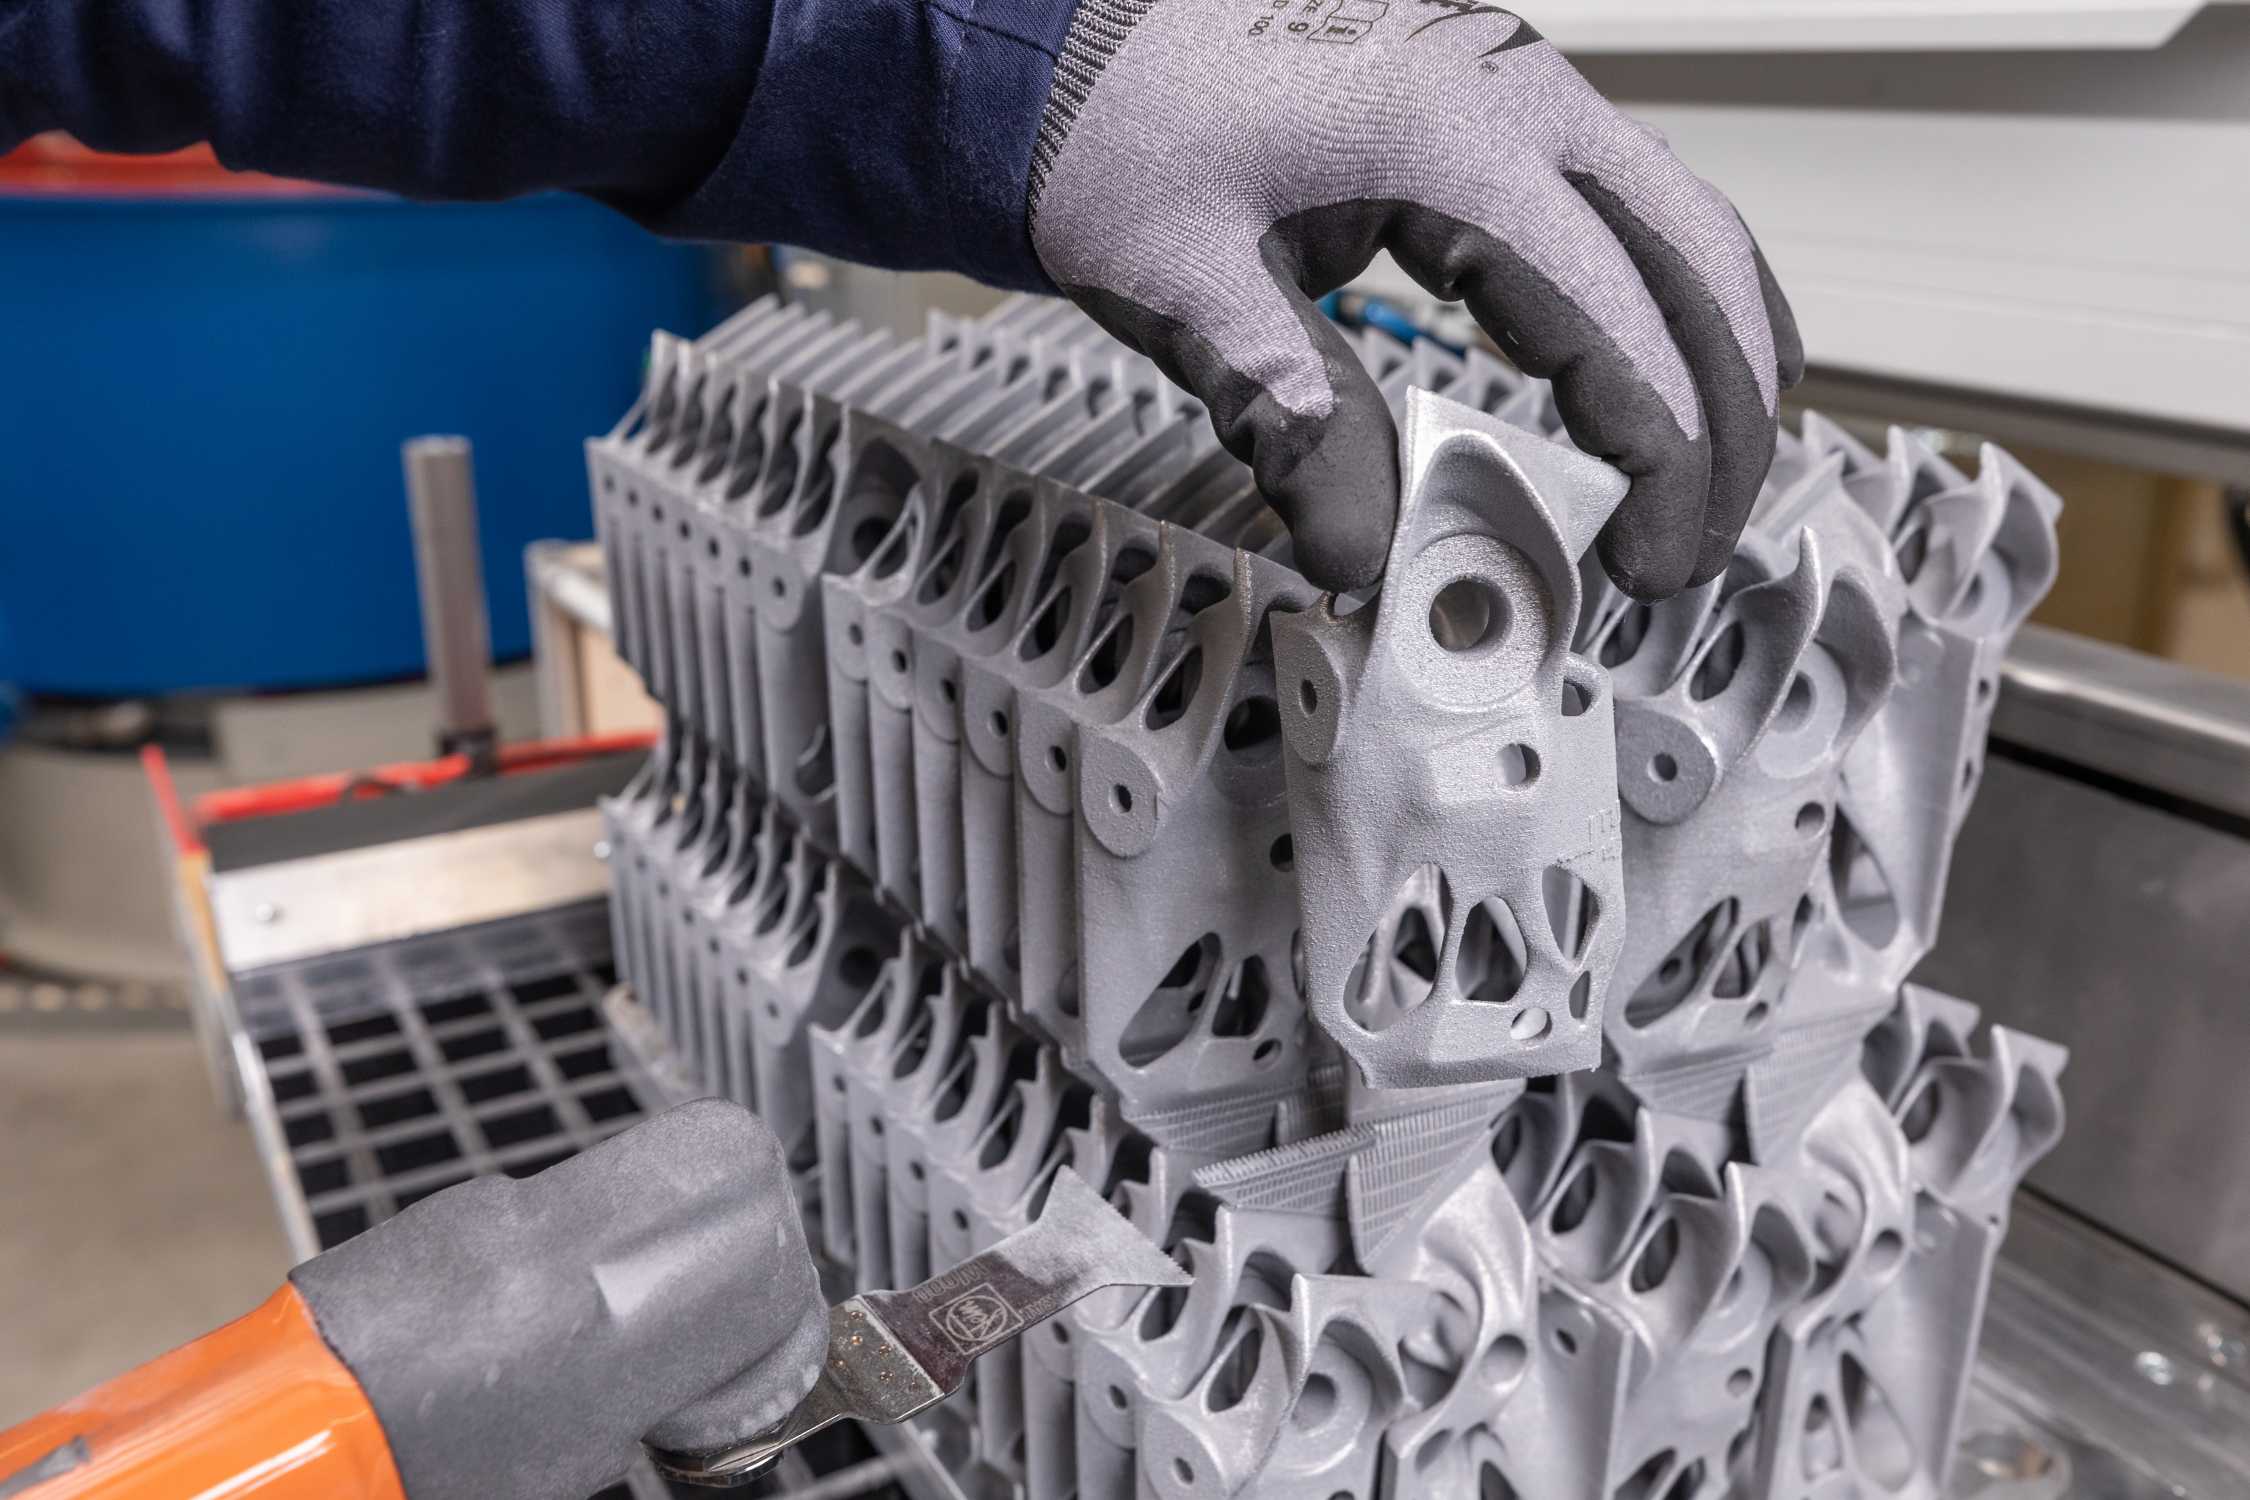 Industrial-scale 3D printing continues to advance at BMW Group - P90410156 Metal Component ProDuction Through Selective Laser Beam Melting 12 2020 2250px